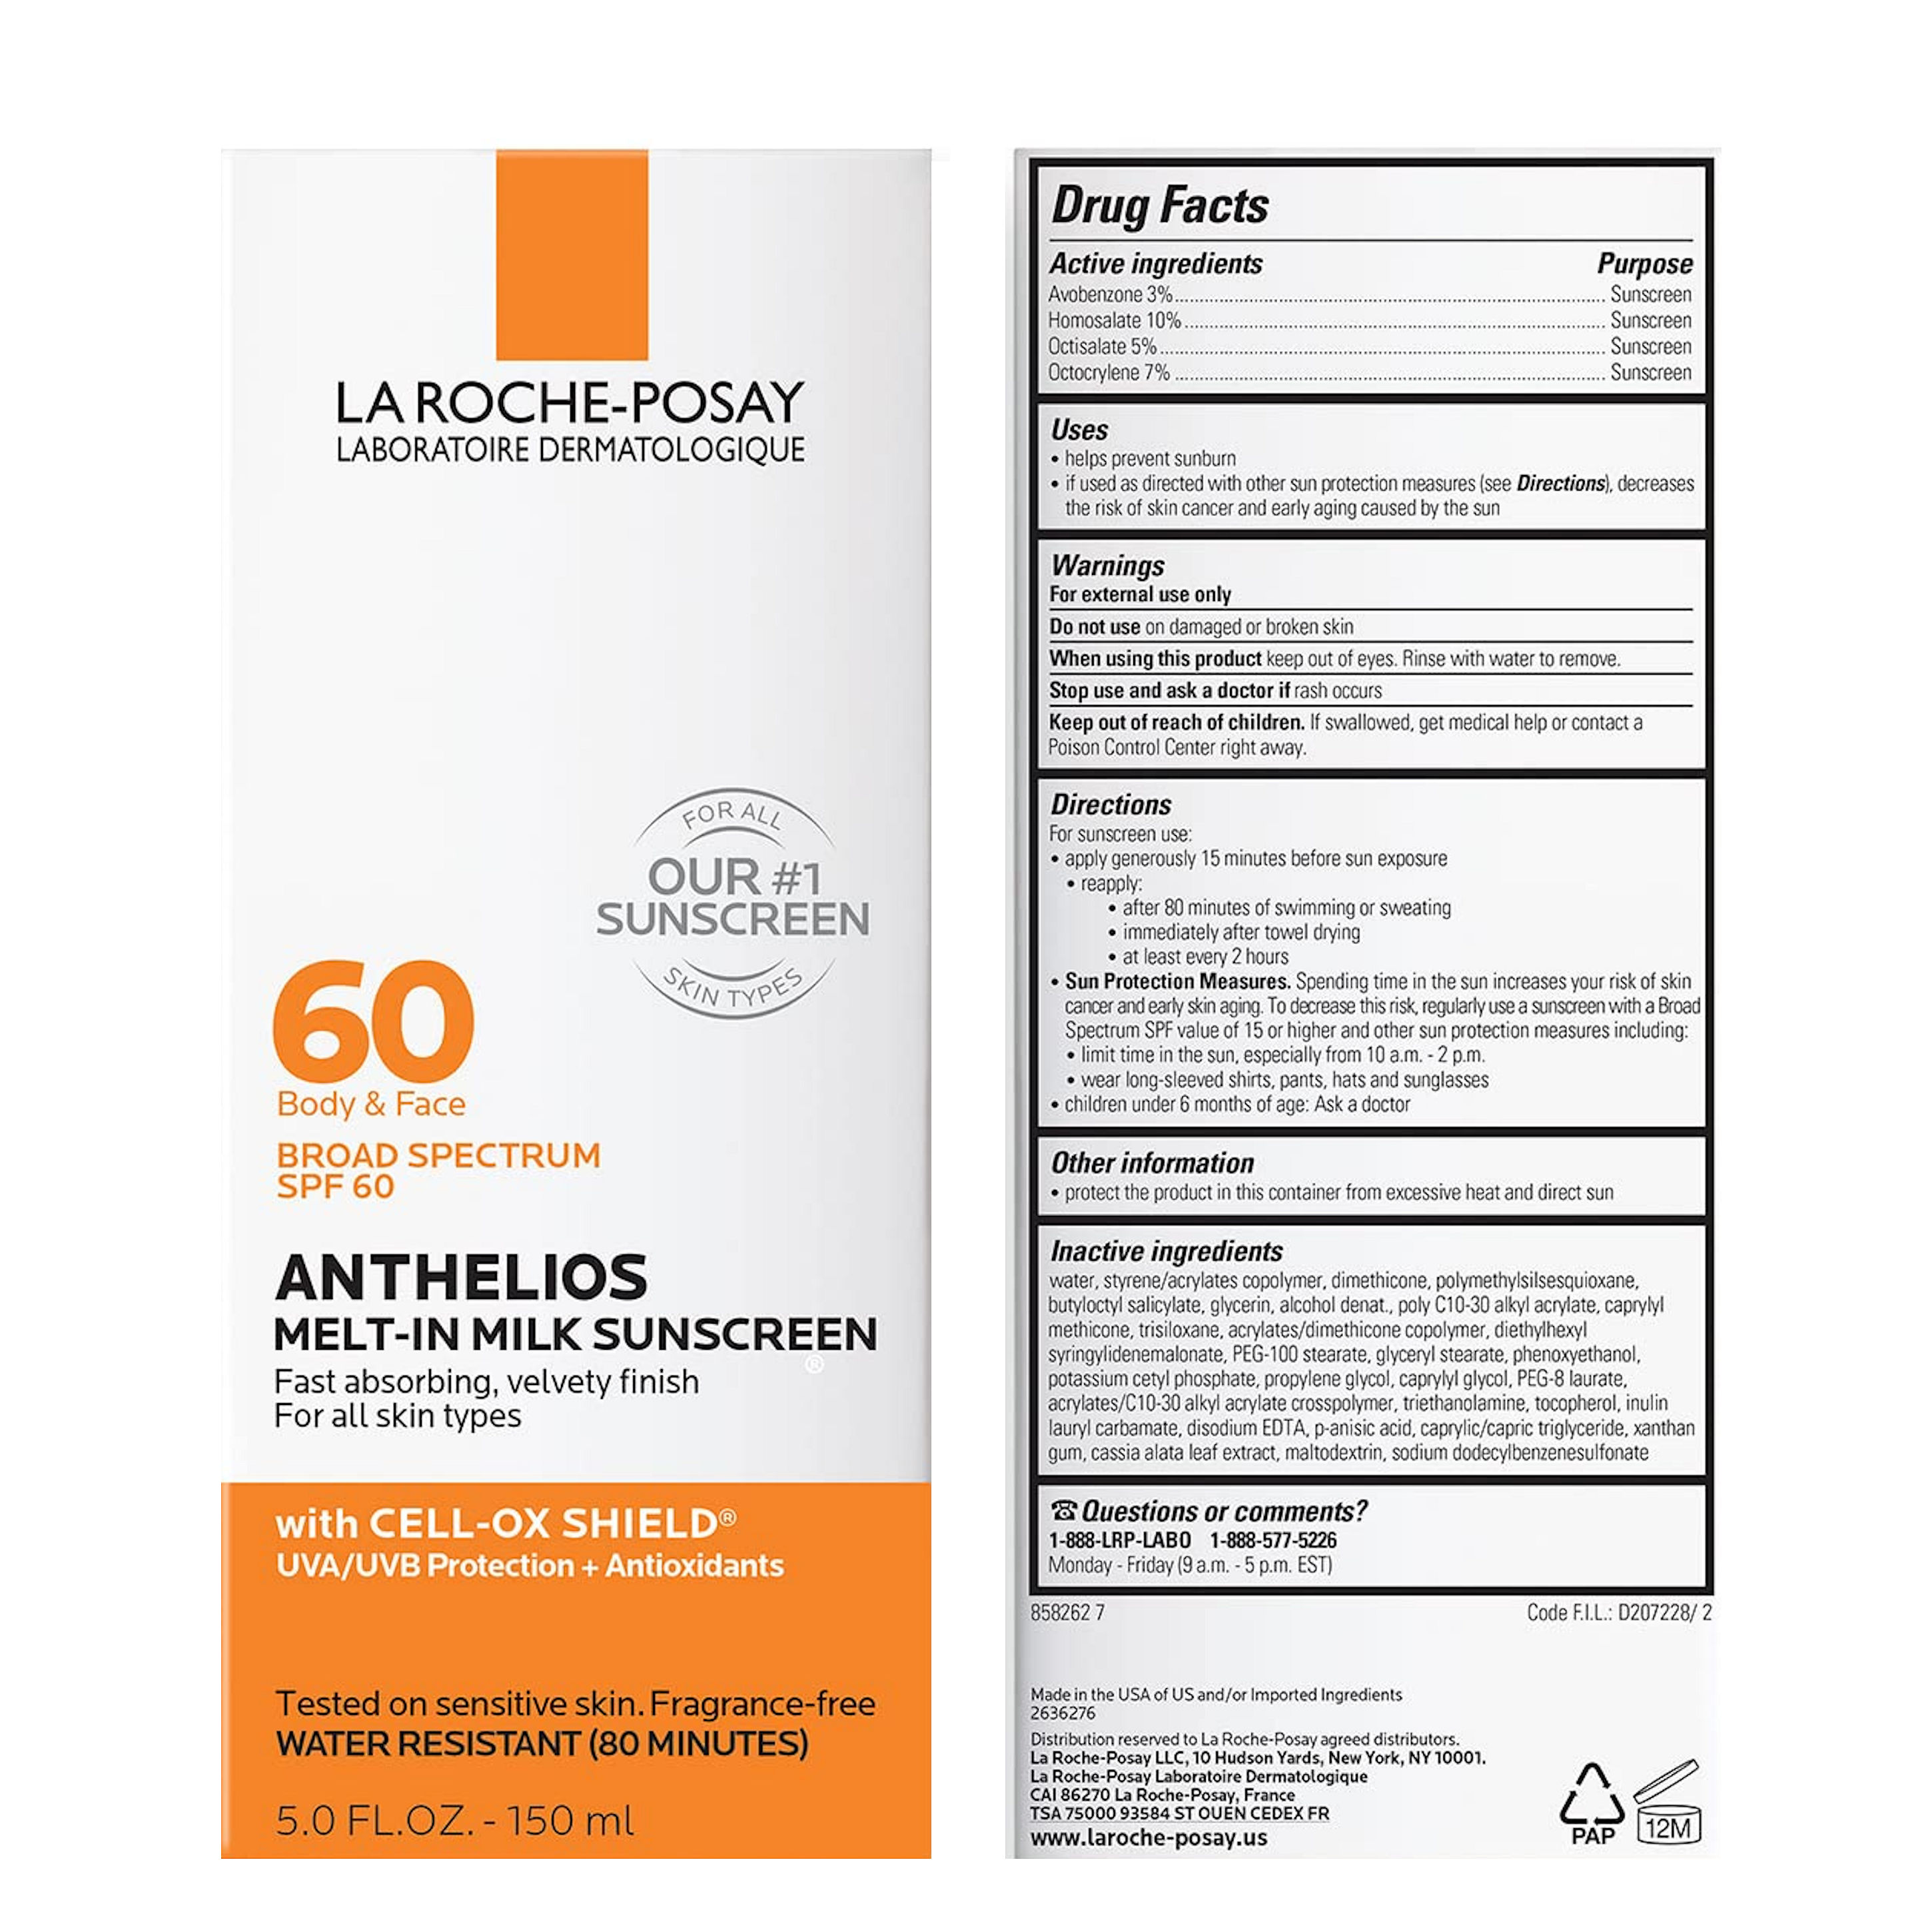 La Roche-Posay Anthelios Melt-In Milk Sunscreen SPF60 for Body & Face 5.0 fl. oz. (150ml) - image 3 of 3